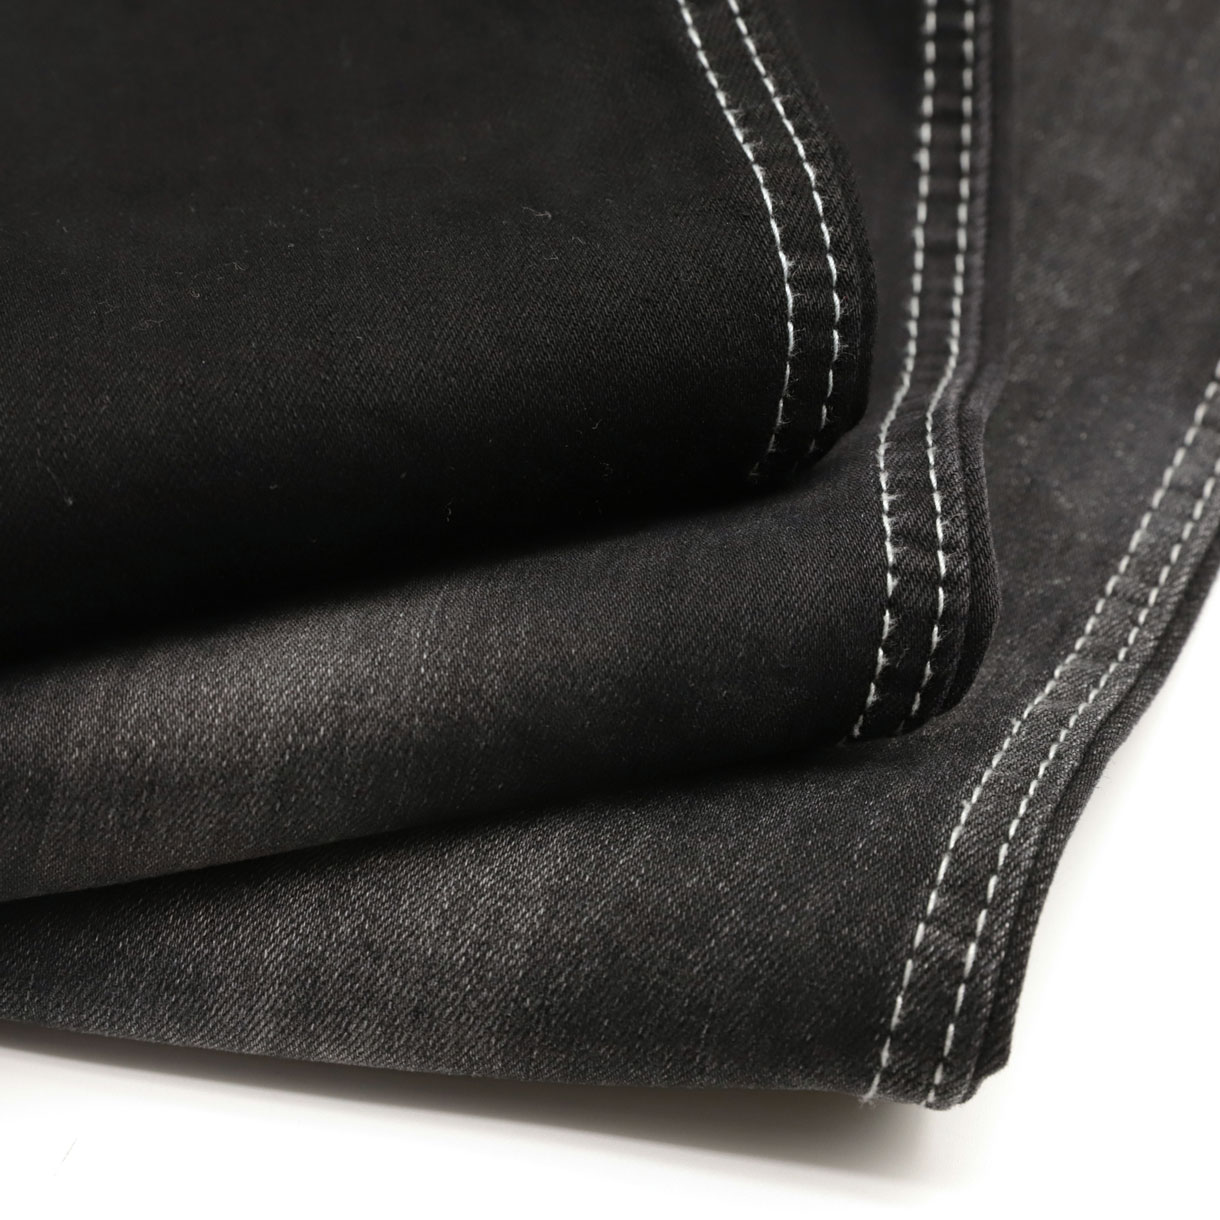 Twill Denim Fabric Quality Affected by What Factors 1